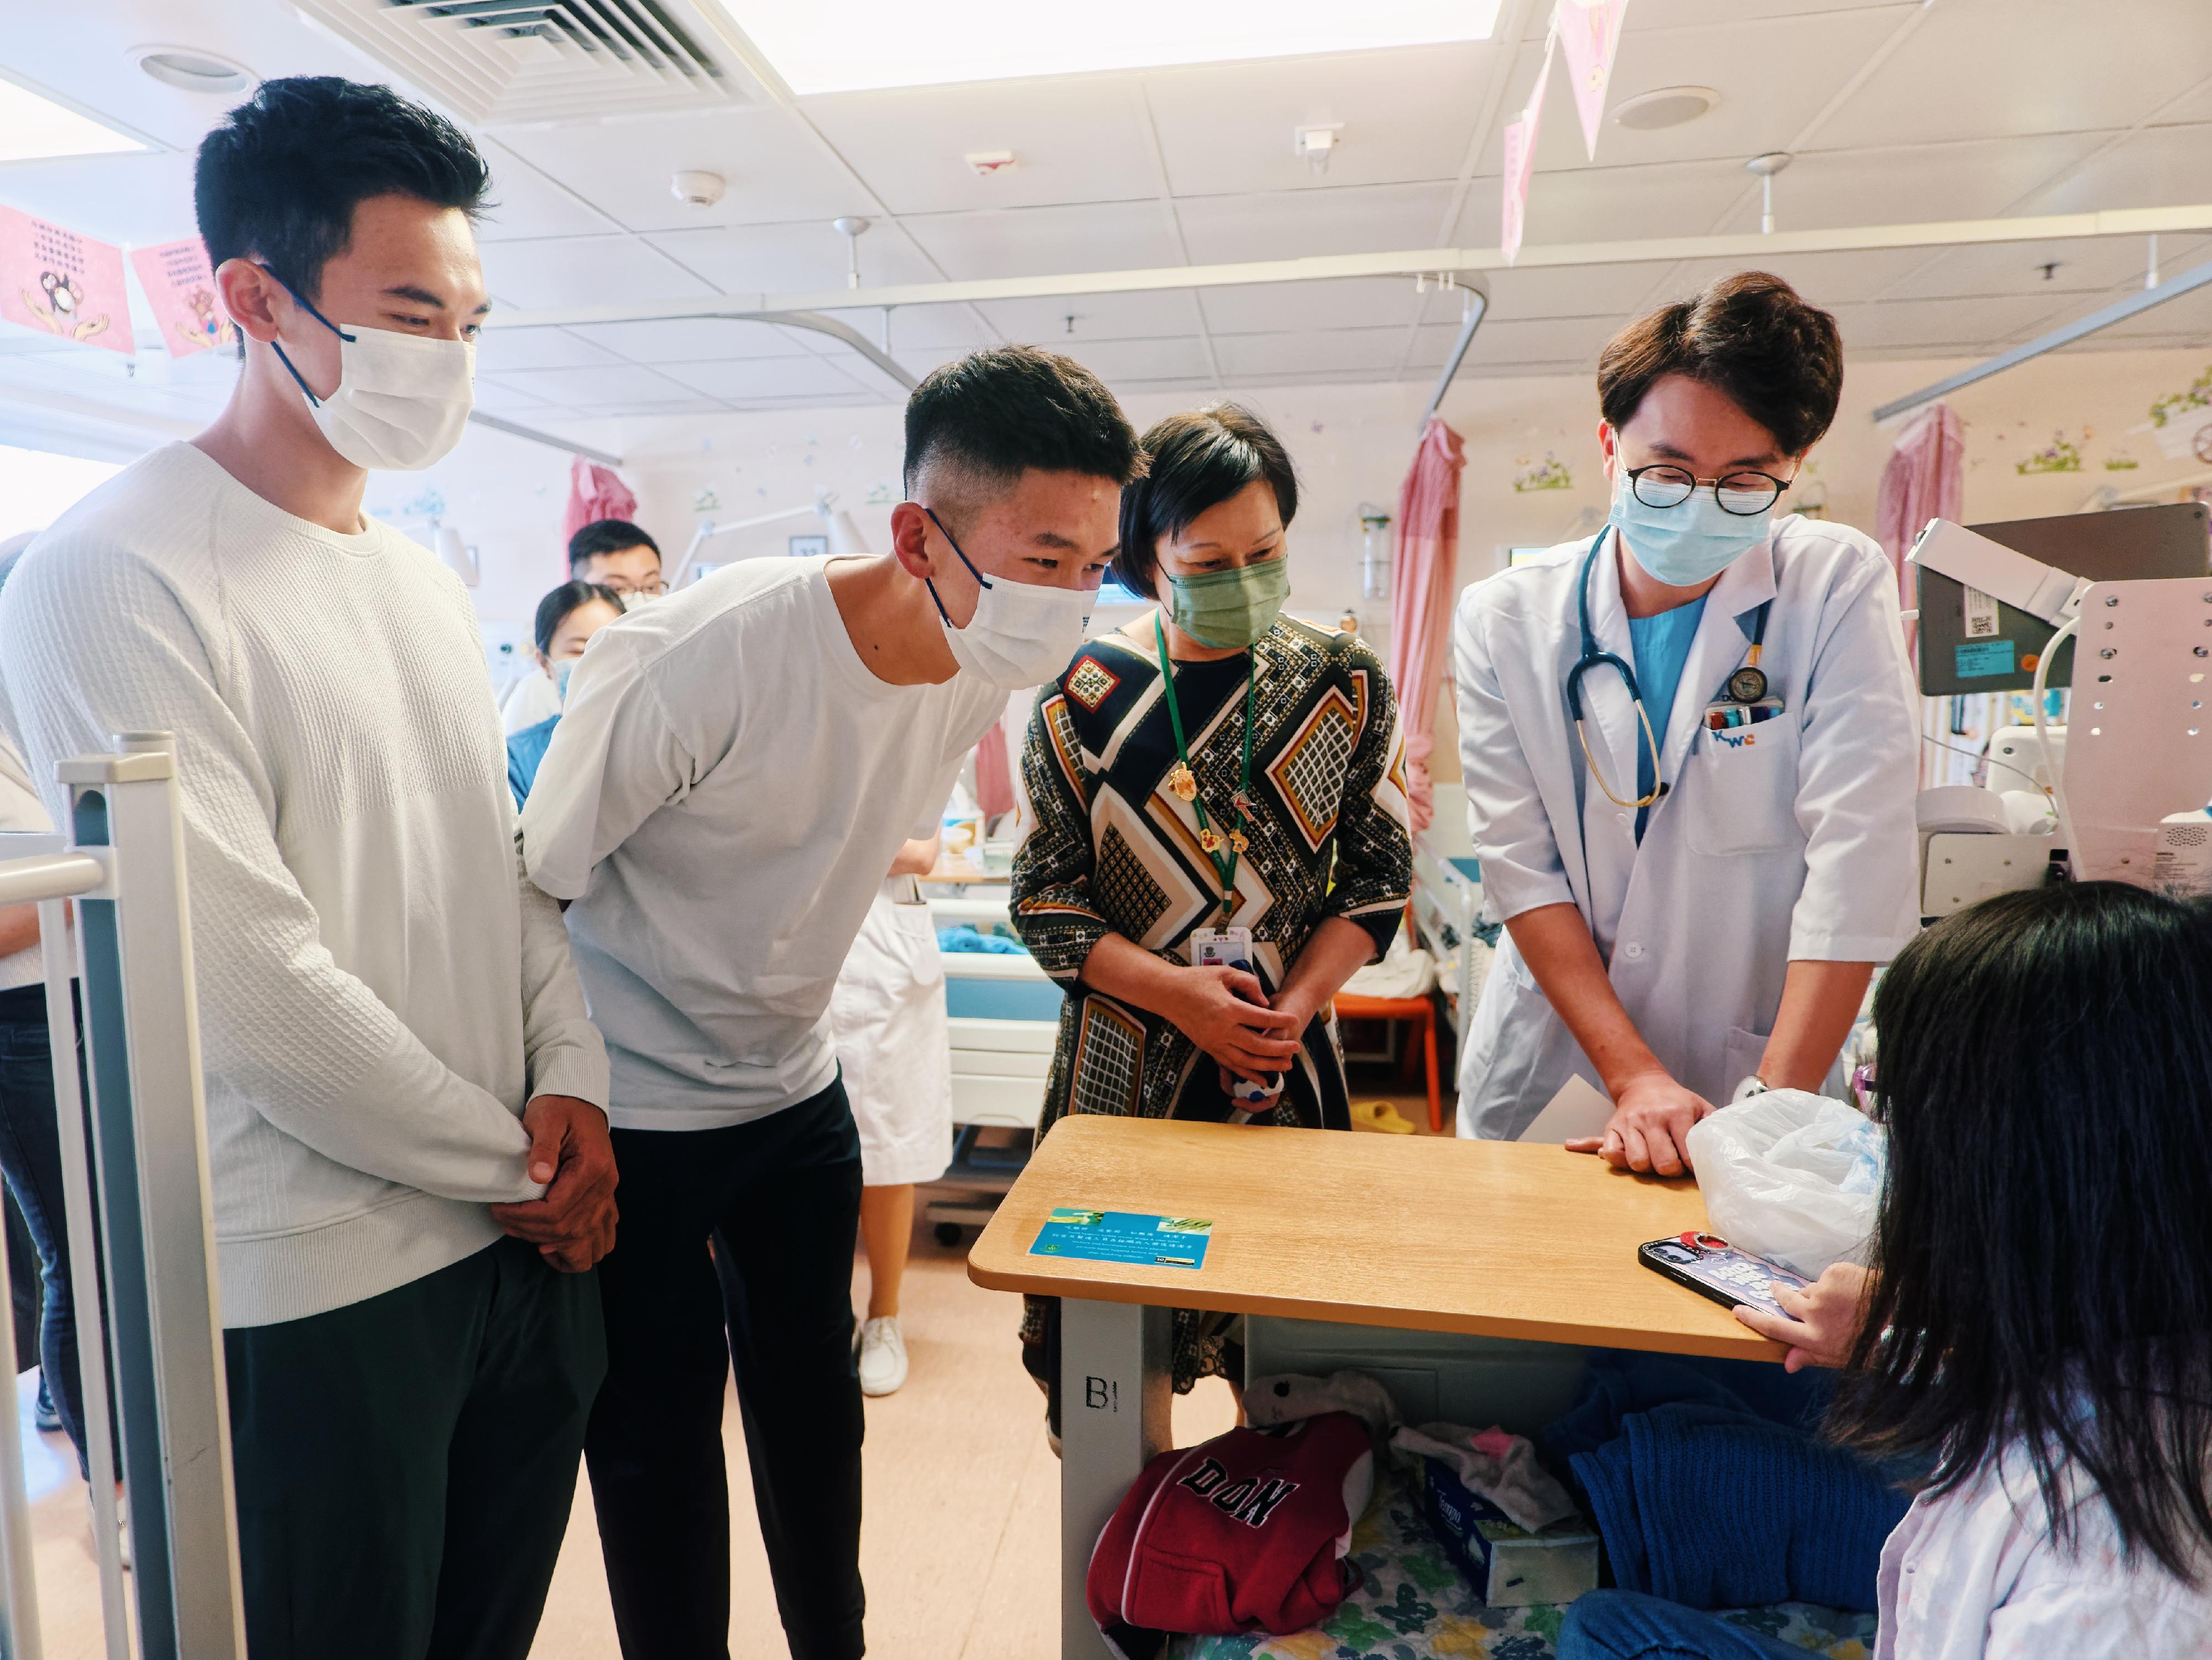 Lam San-tung (first left) and Wong Wai-chun (second left), who won the gold medal in Rowing Men's Coxless Pairs in the 19th Asian Games Hangzhou, visited Princess Margaret Hospital on November 13, where they interacted with paediatric patients and wished them a speedy recovery.